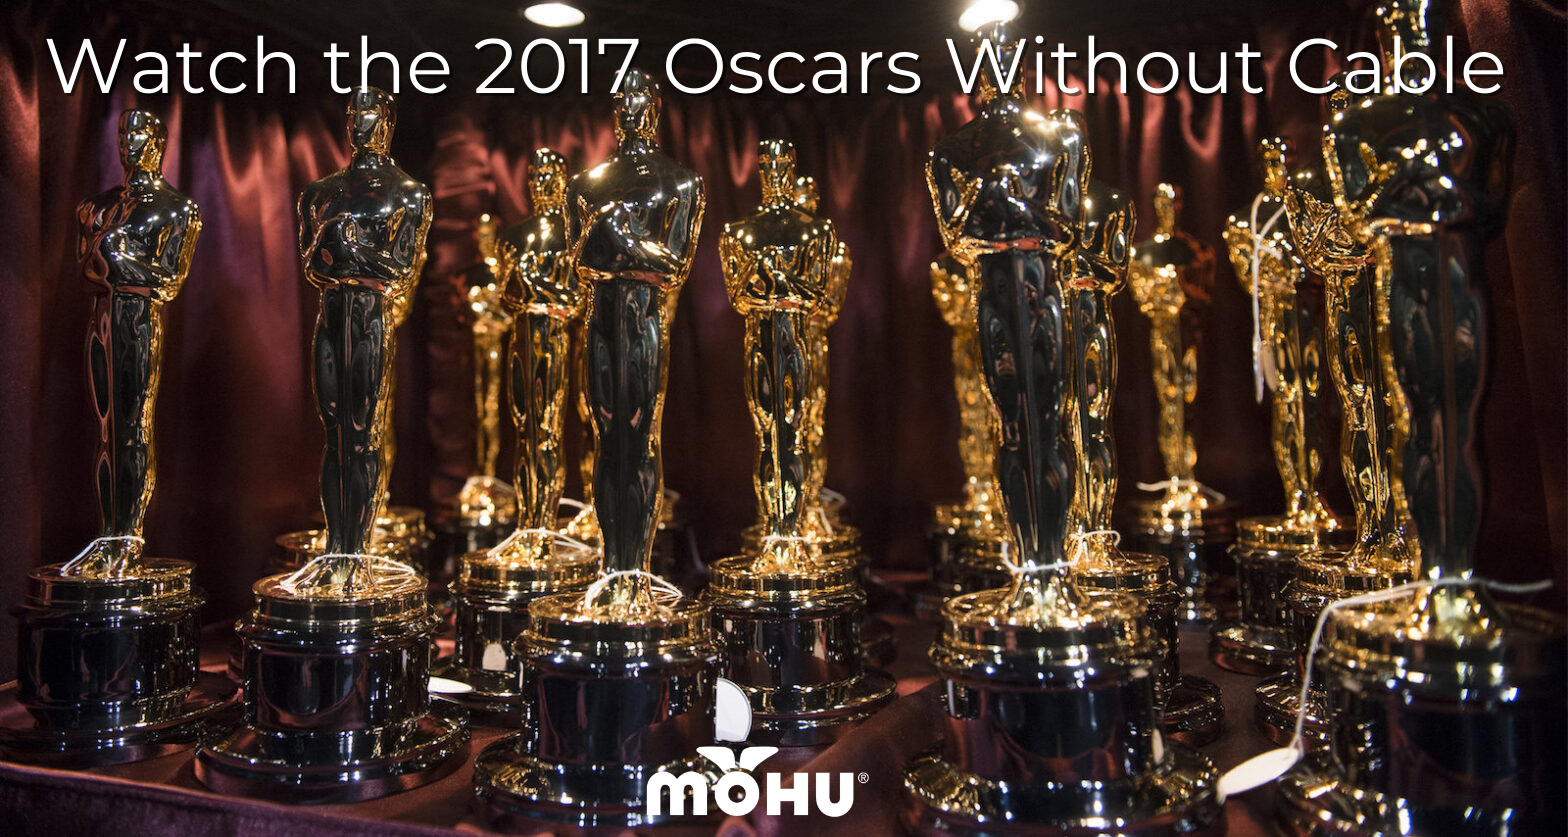 Table full of Oscar Awards and the copy "Watch the 2017 Oscars Without Cable" and Mohu logo